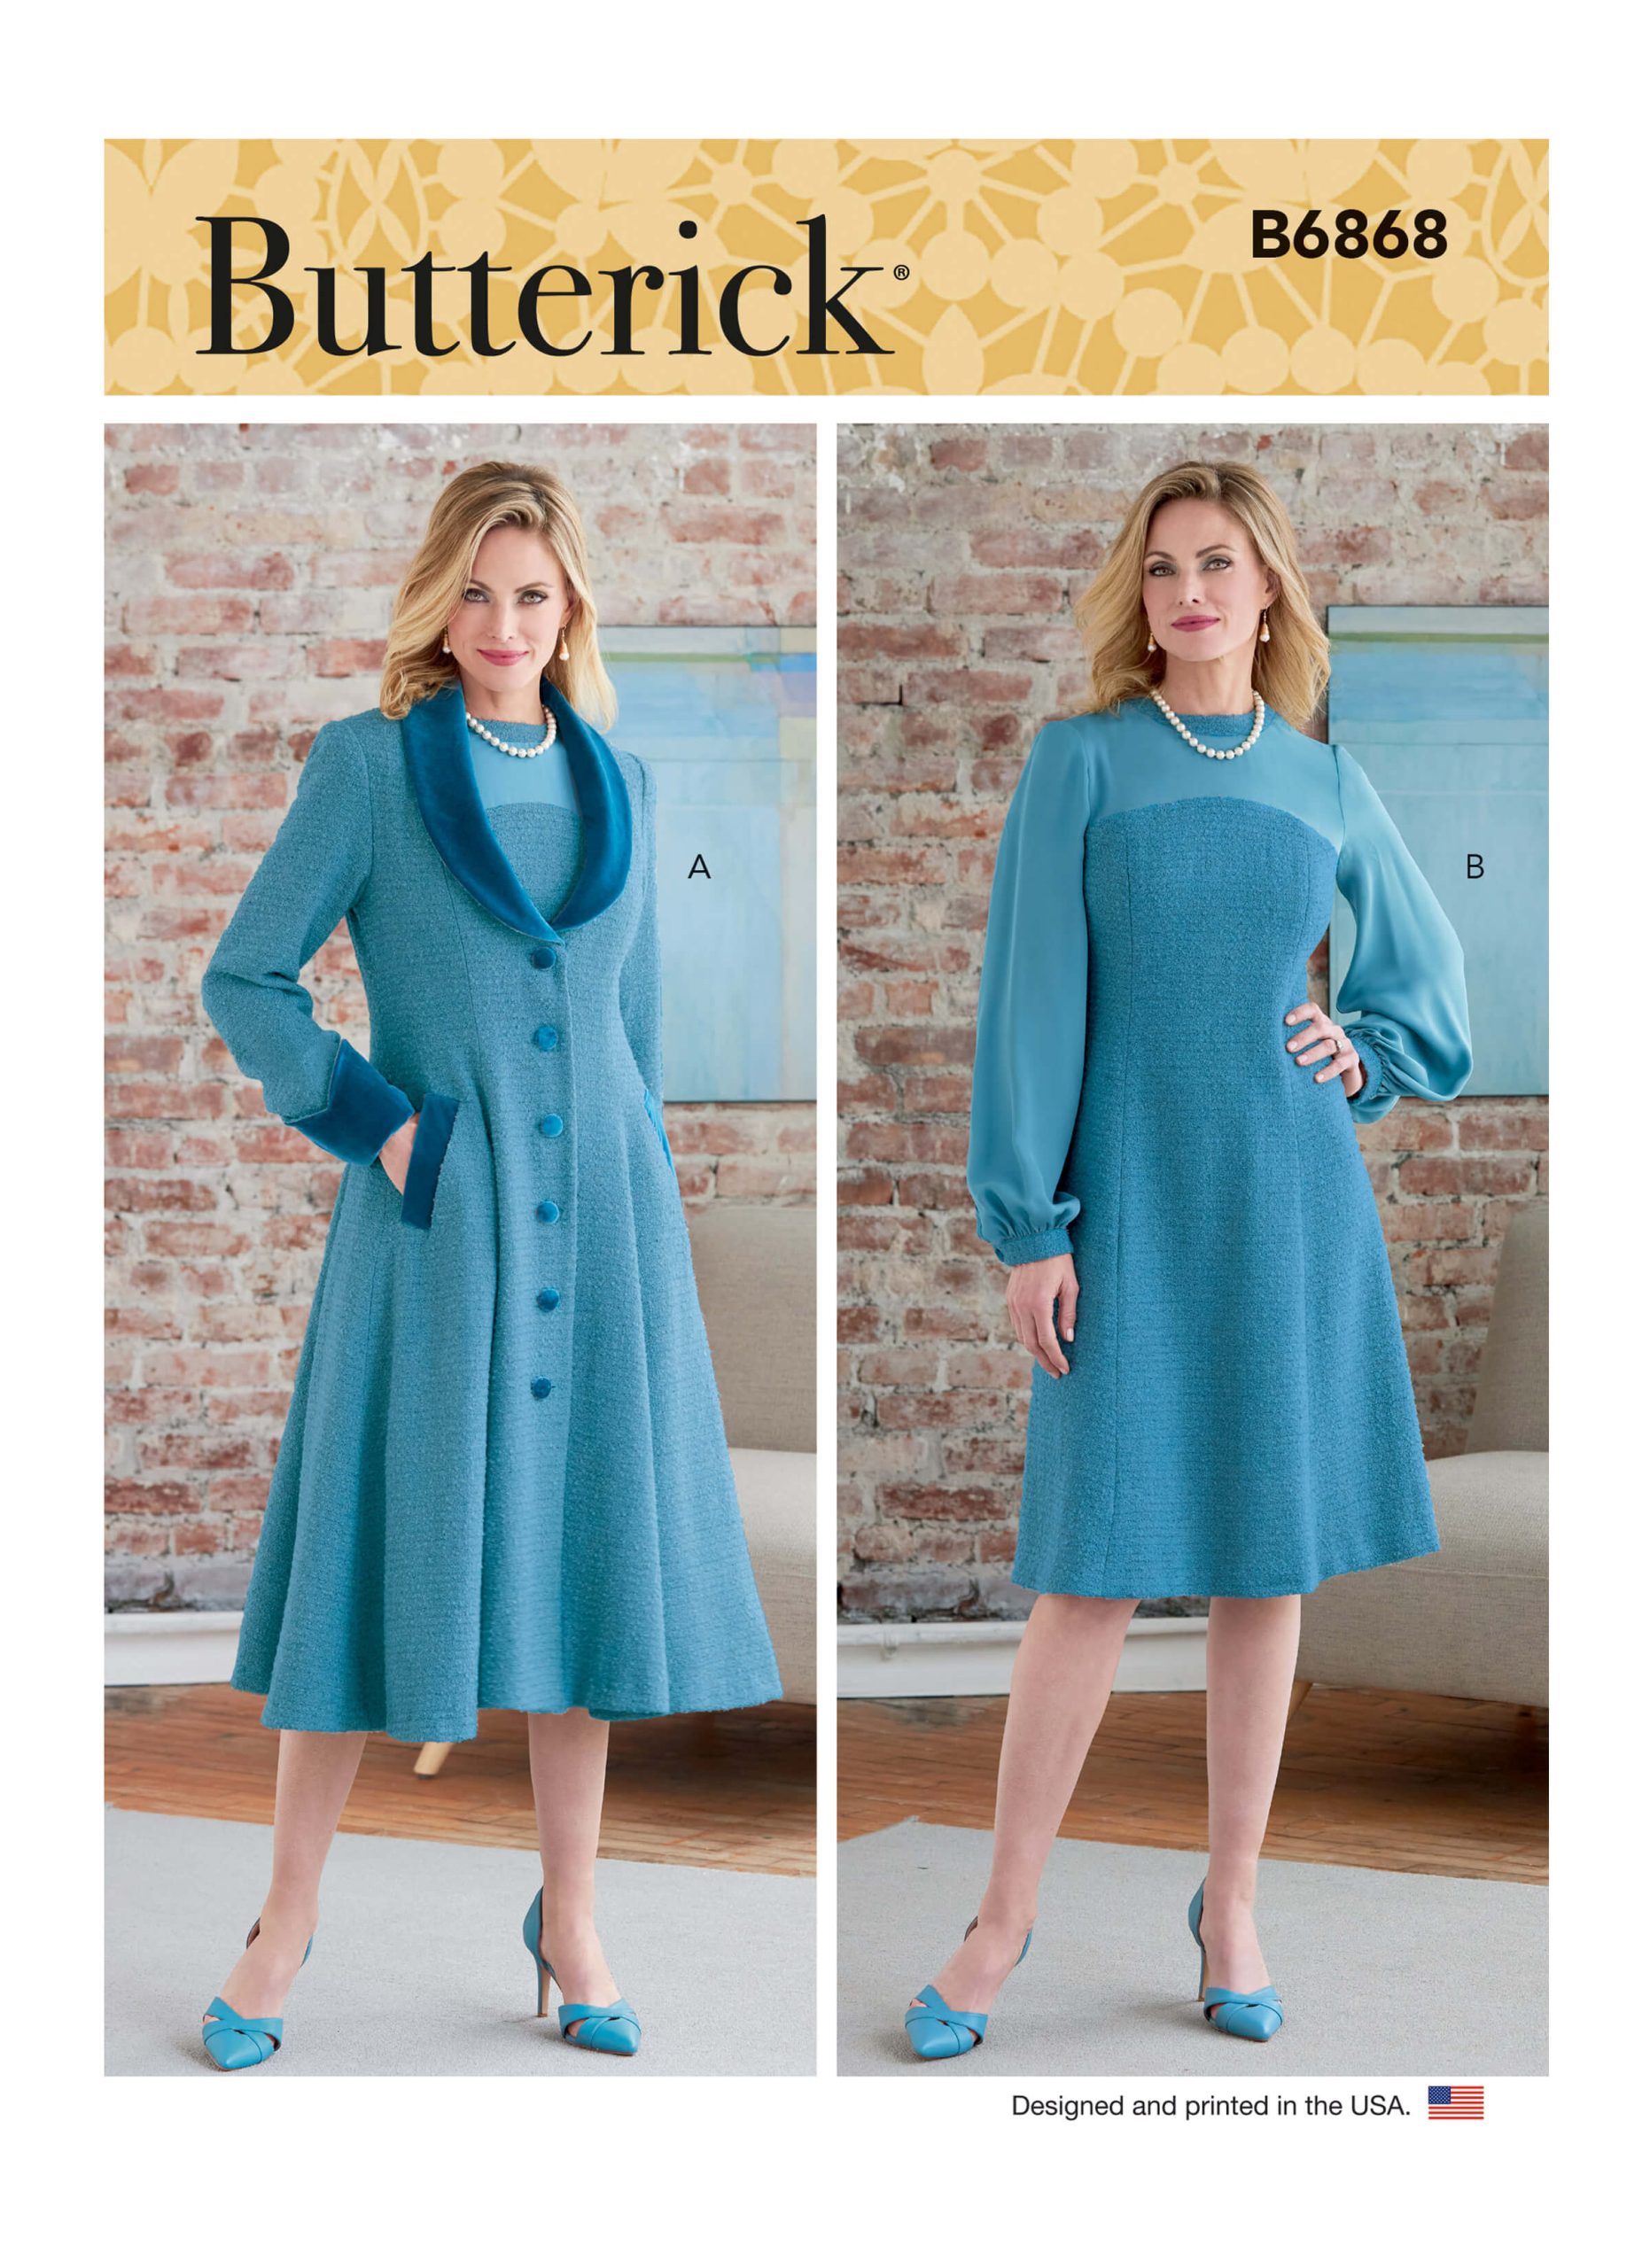 Butterick Sewing Pattern B6868 Misses' and Women's Coat and Dress